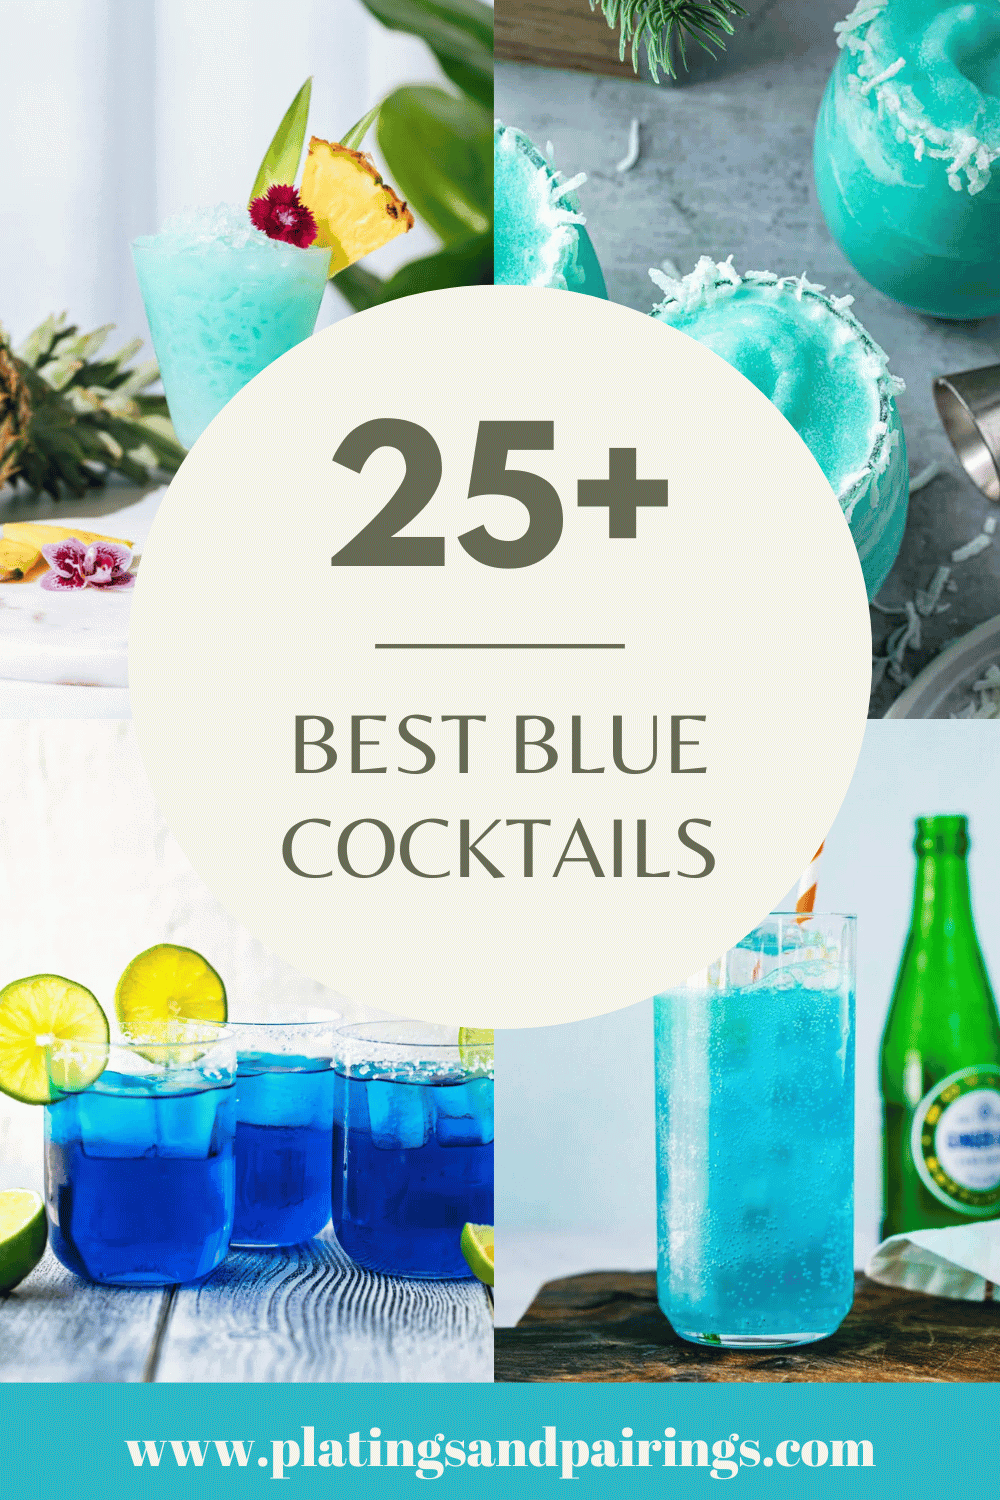 Collage of blue cocktails with text overlay.